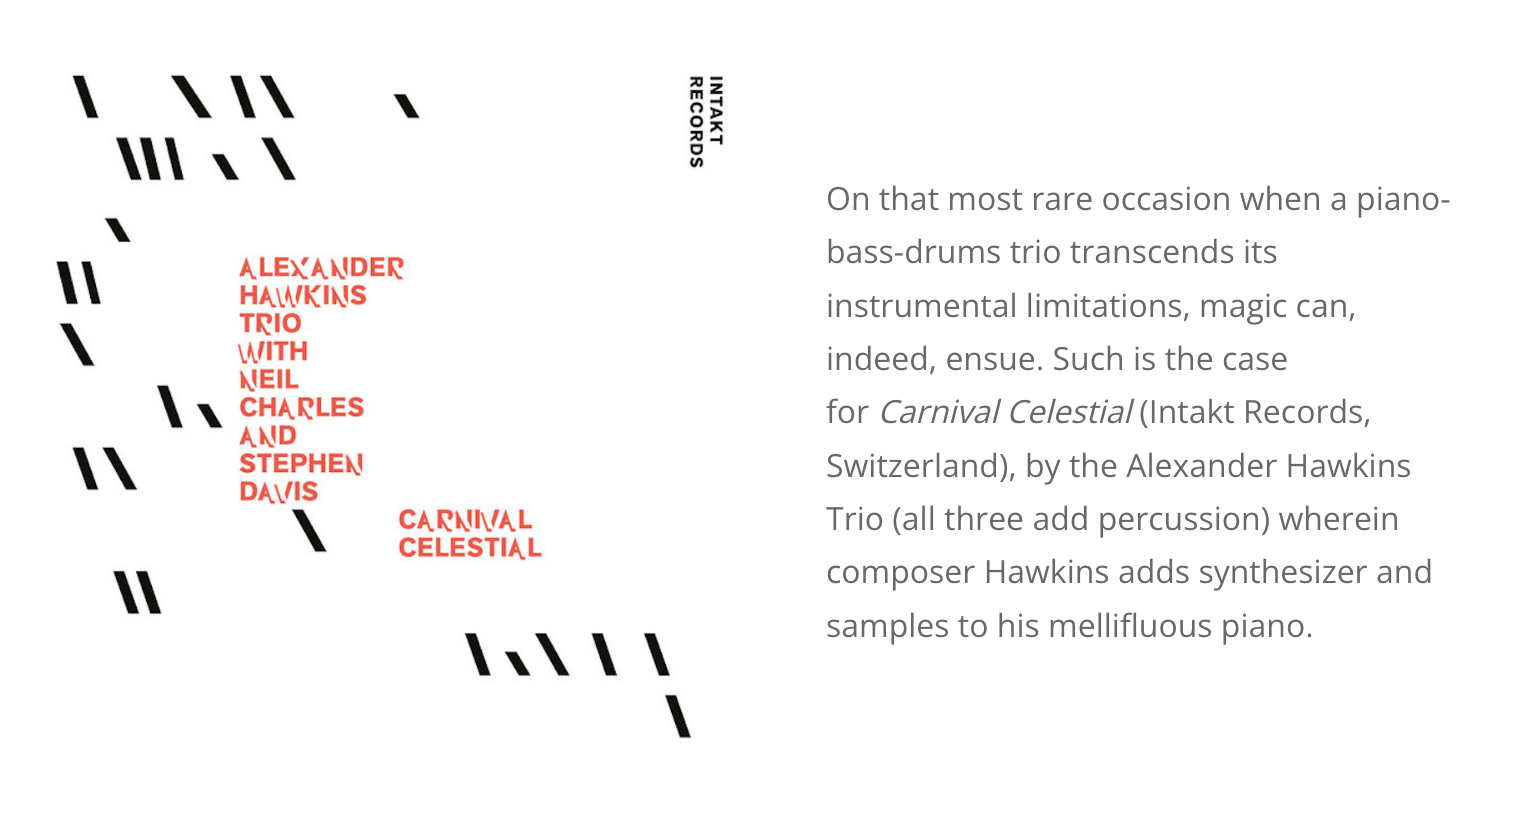 On that most rare occasion when a piano-bass-drums trio transcends its instrumental limitations, magic can, indeed, ensue. Such is the case for Carnival Celestial (Intakt Records, Switzerland), by the Alexander Hawkins Trio (all three add percussion) wherein composer Hawkins adds synthesizer and samples to his mellifluous piano.